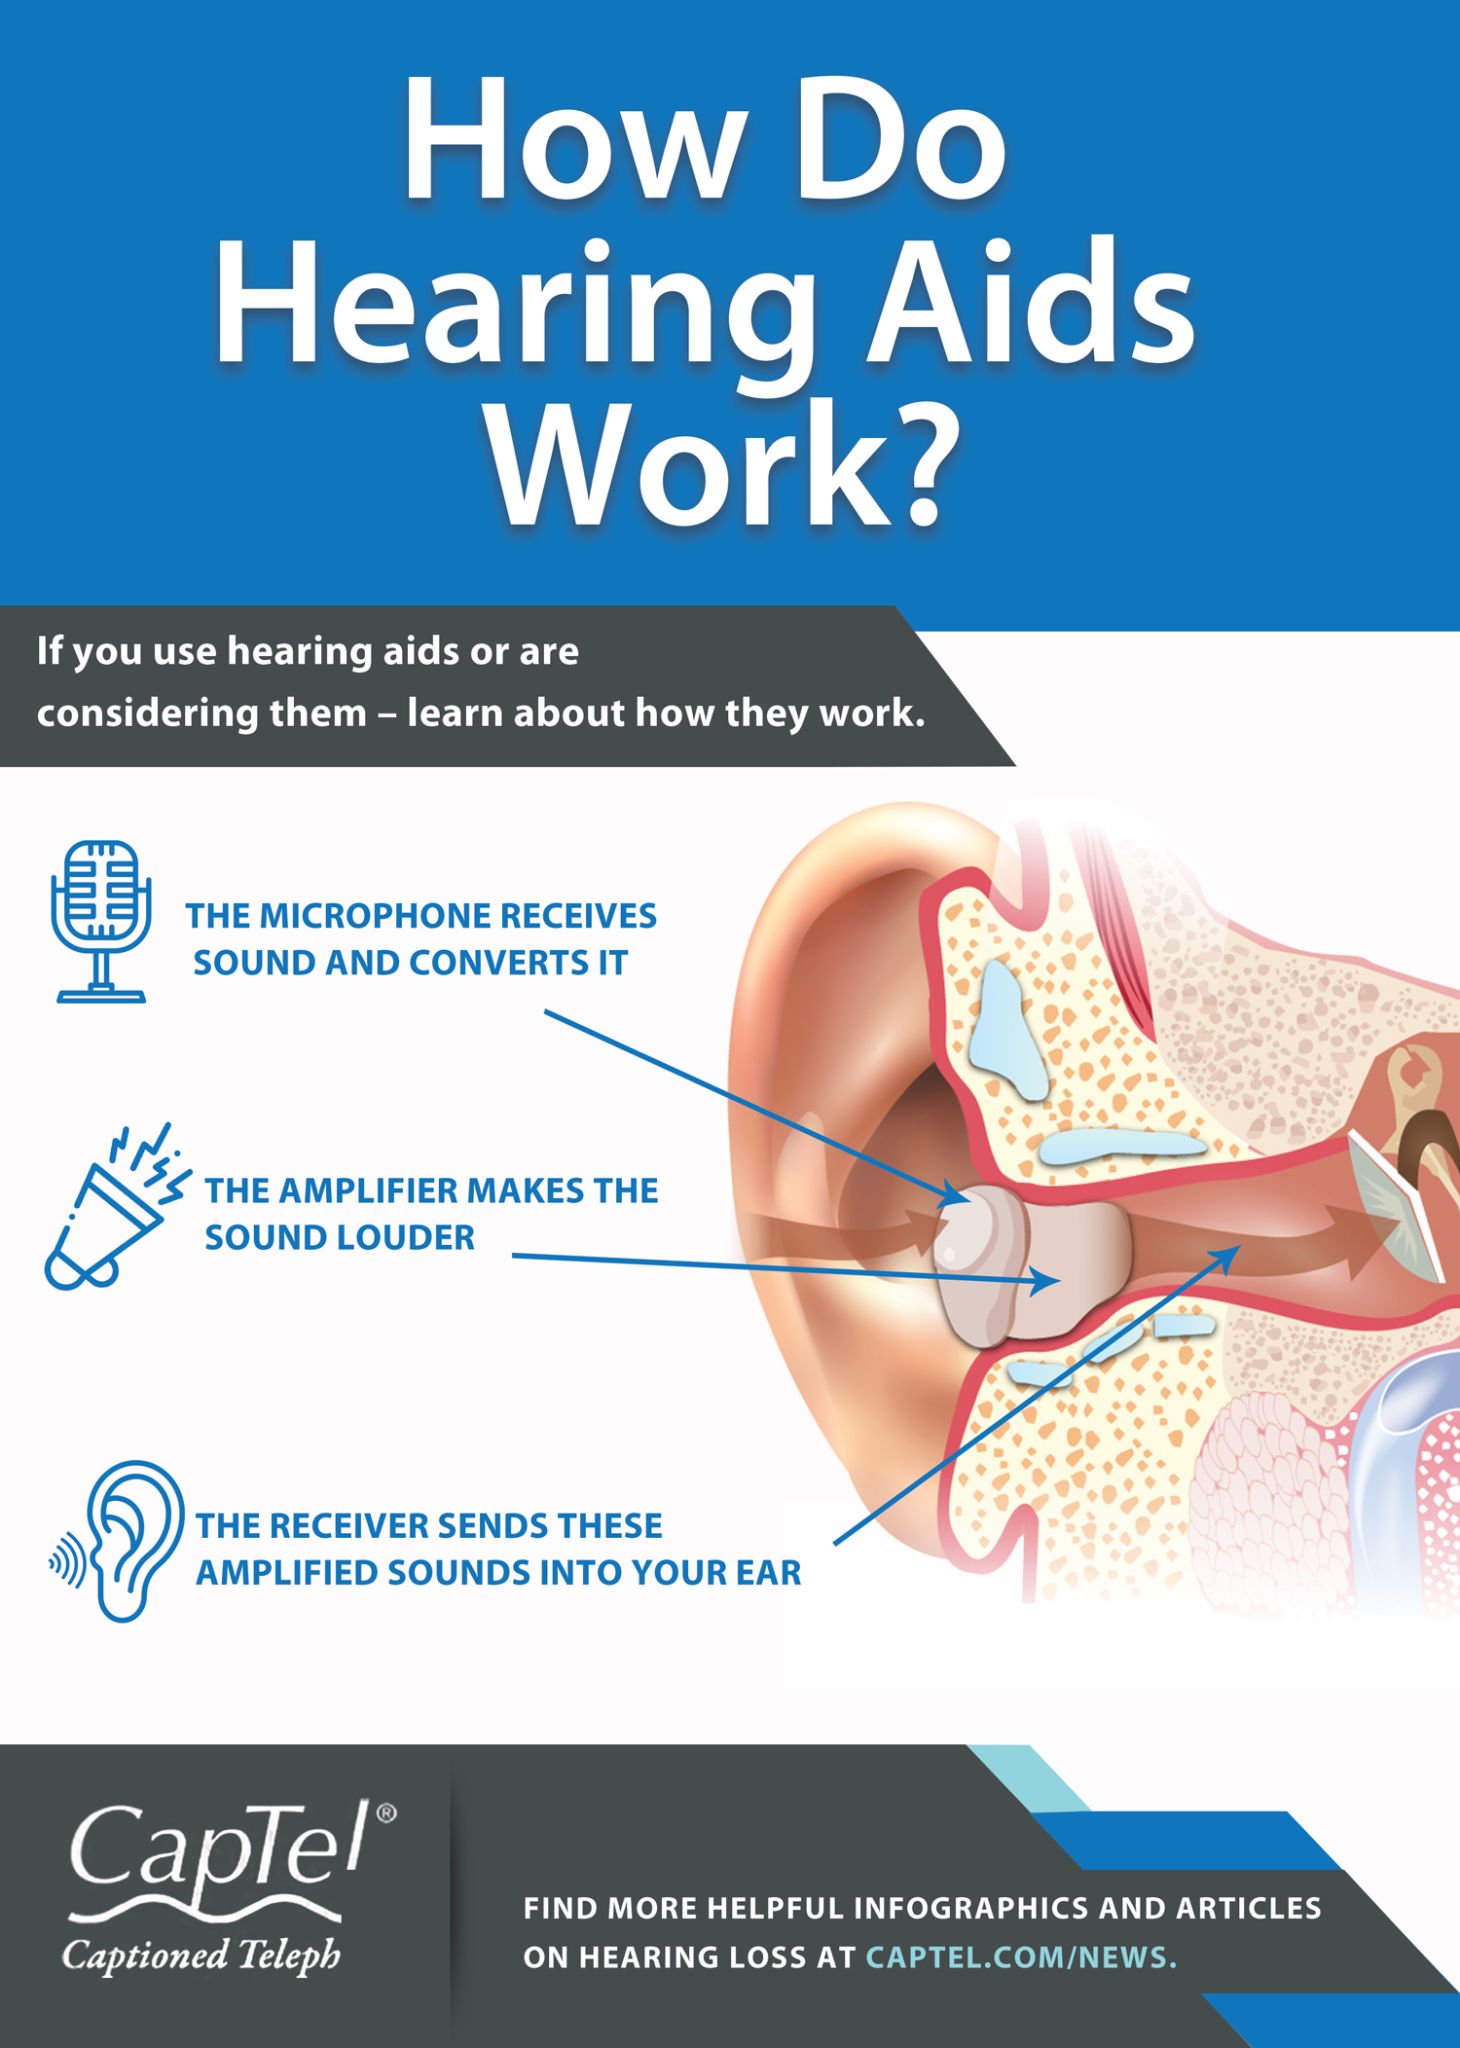 How Do Hearing Aids Work? [Infographic]